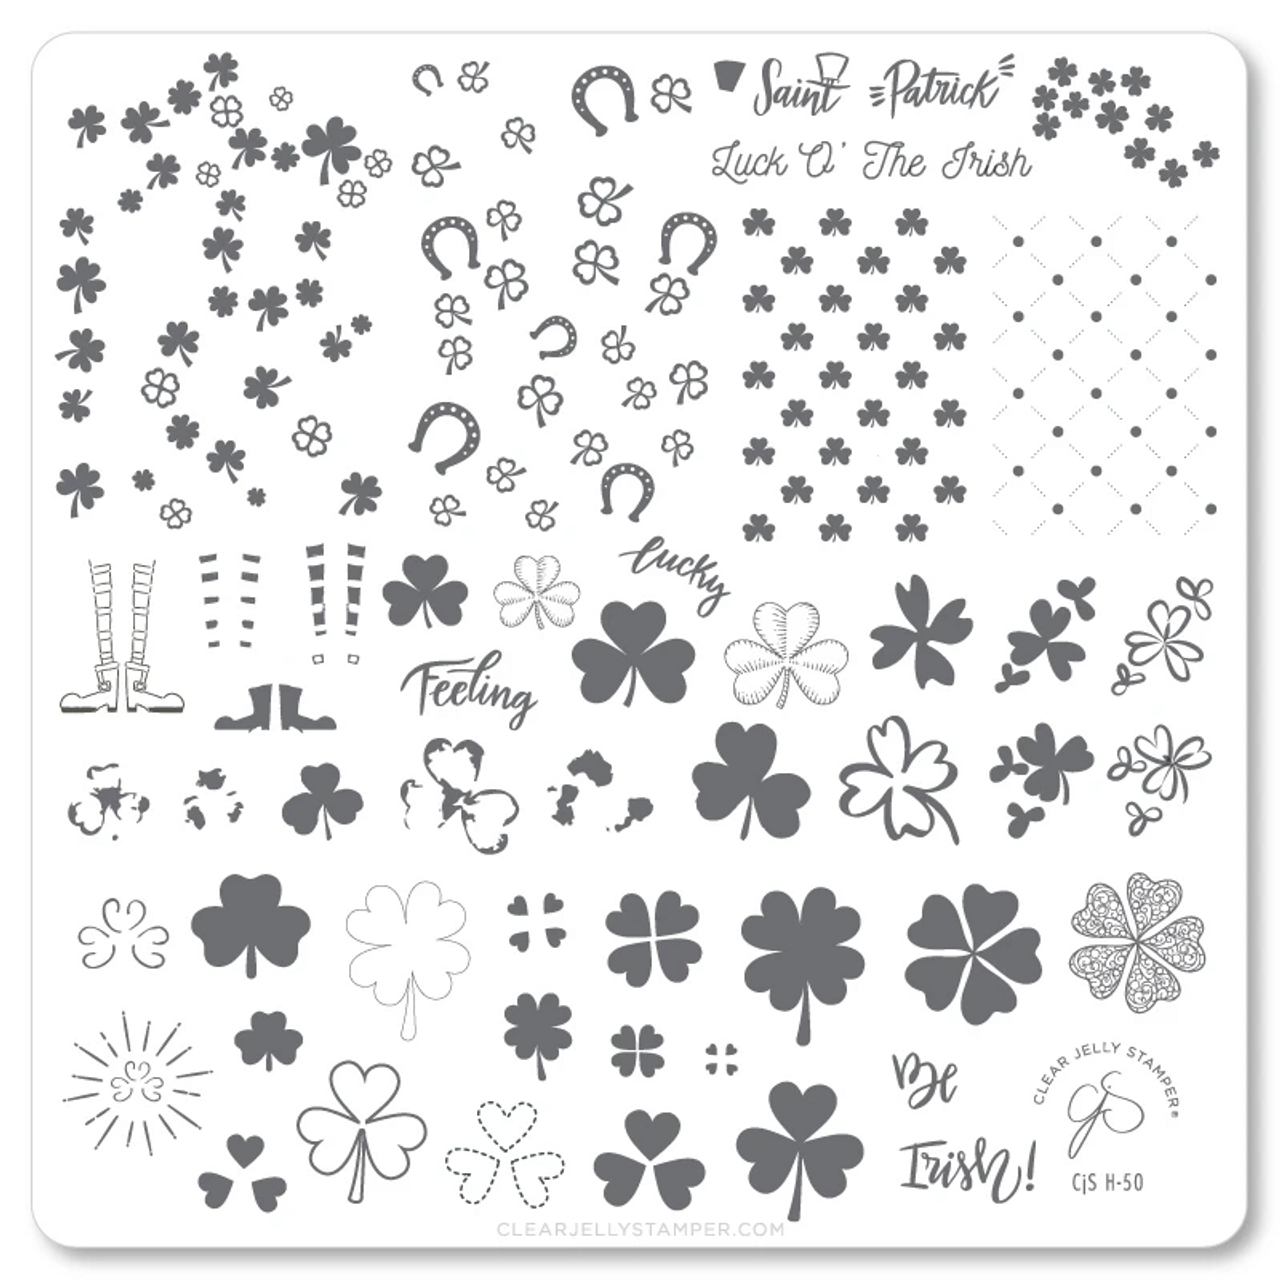 Feeling Lucky? (CjS H-50) - Nail Stamping Plate